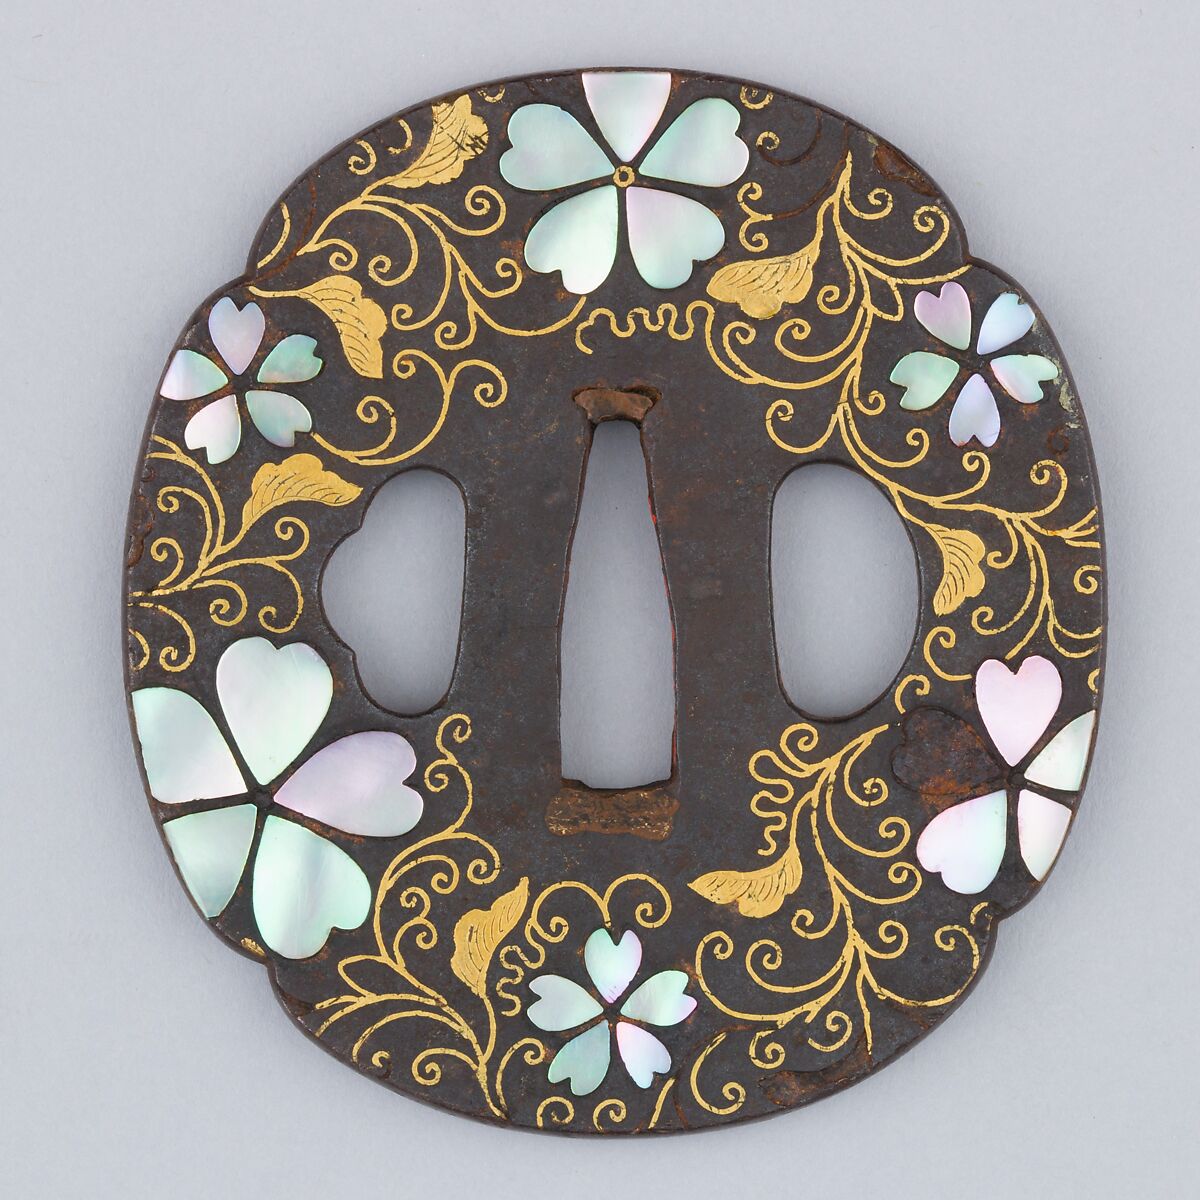 Sword Guard (Tsuba), Iron, mother-of-pearl, gold, copper, Japanese 